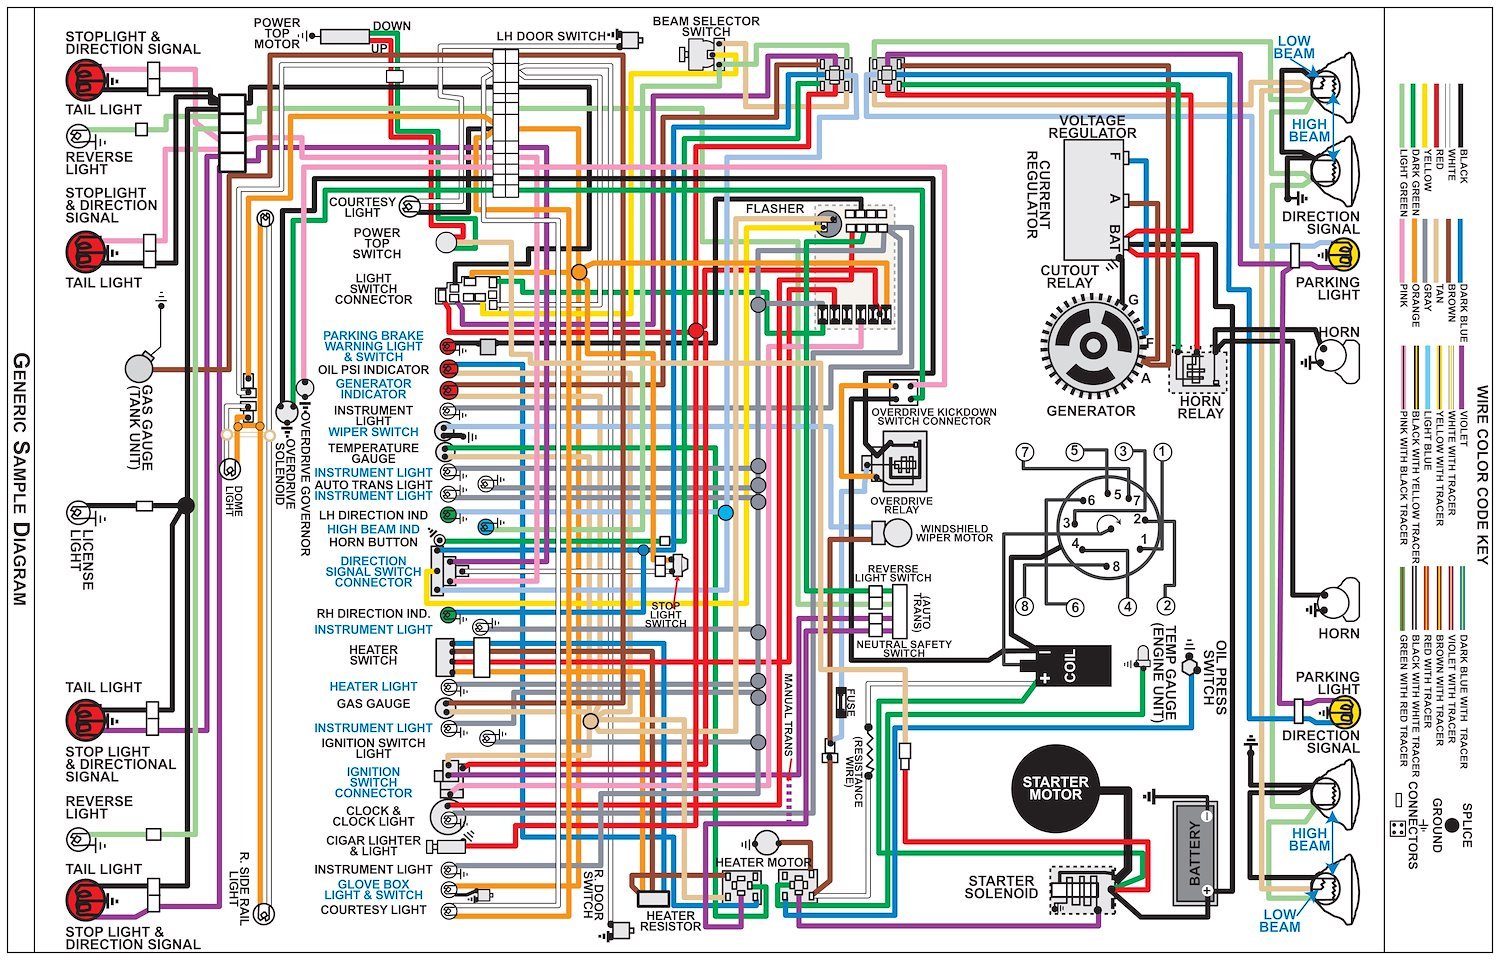 Wiring Diagram for 1978 Ford F-Series Truck, 11 in x 17 in., Laminated